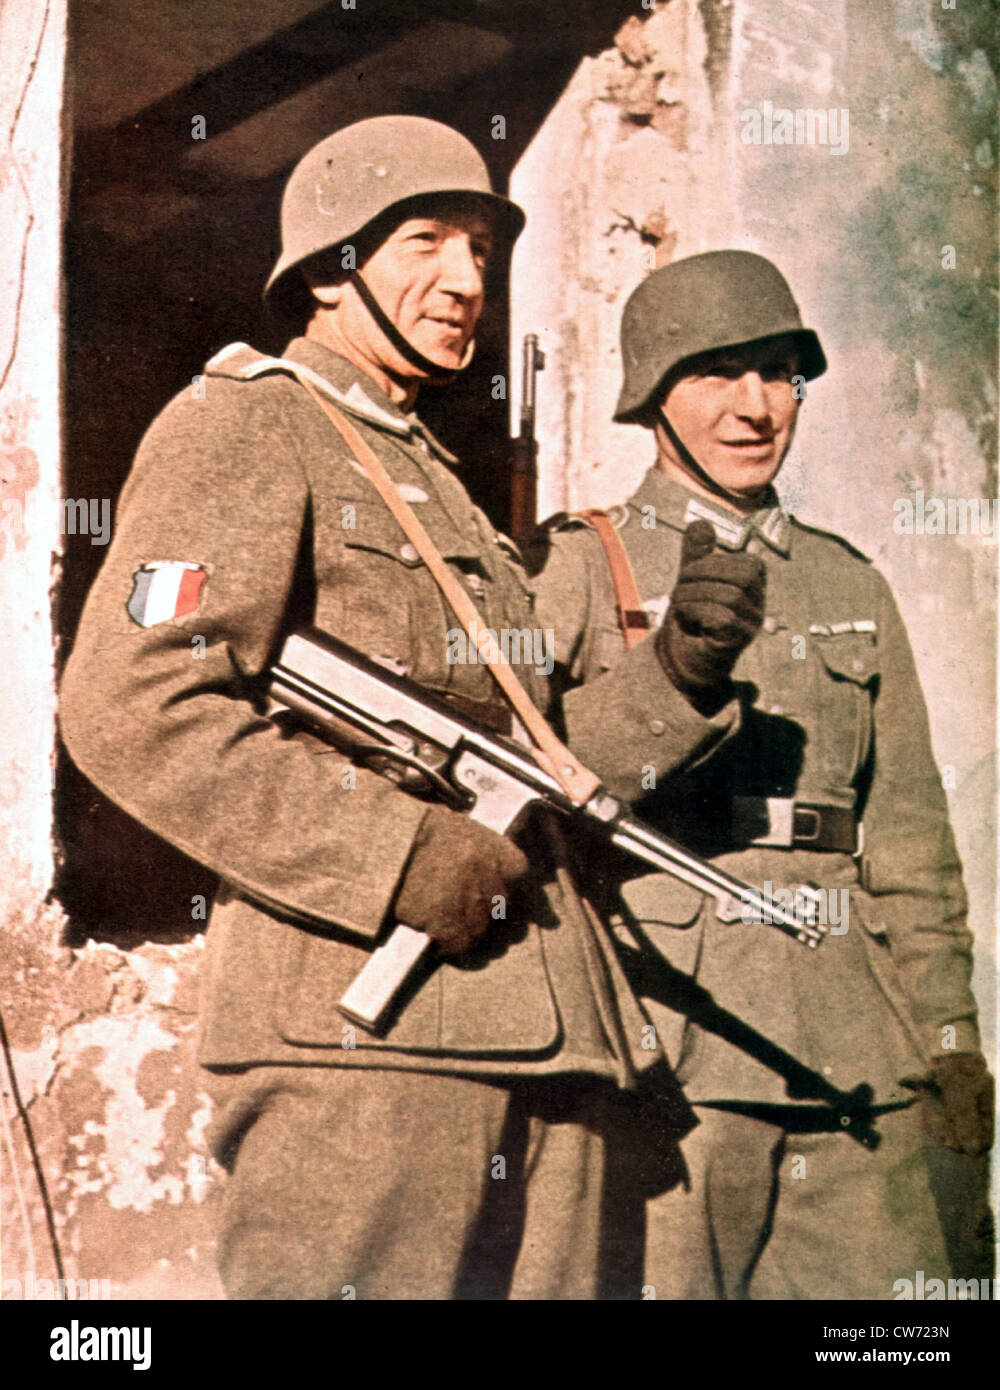 1942, Soldiers of the  LVF (French Volunteer Legion). Photo from 'Signal' magazine Stock Photo